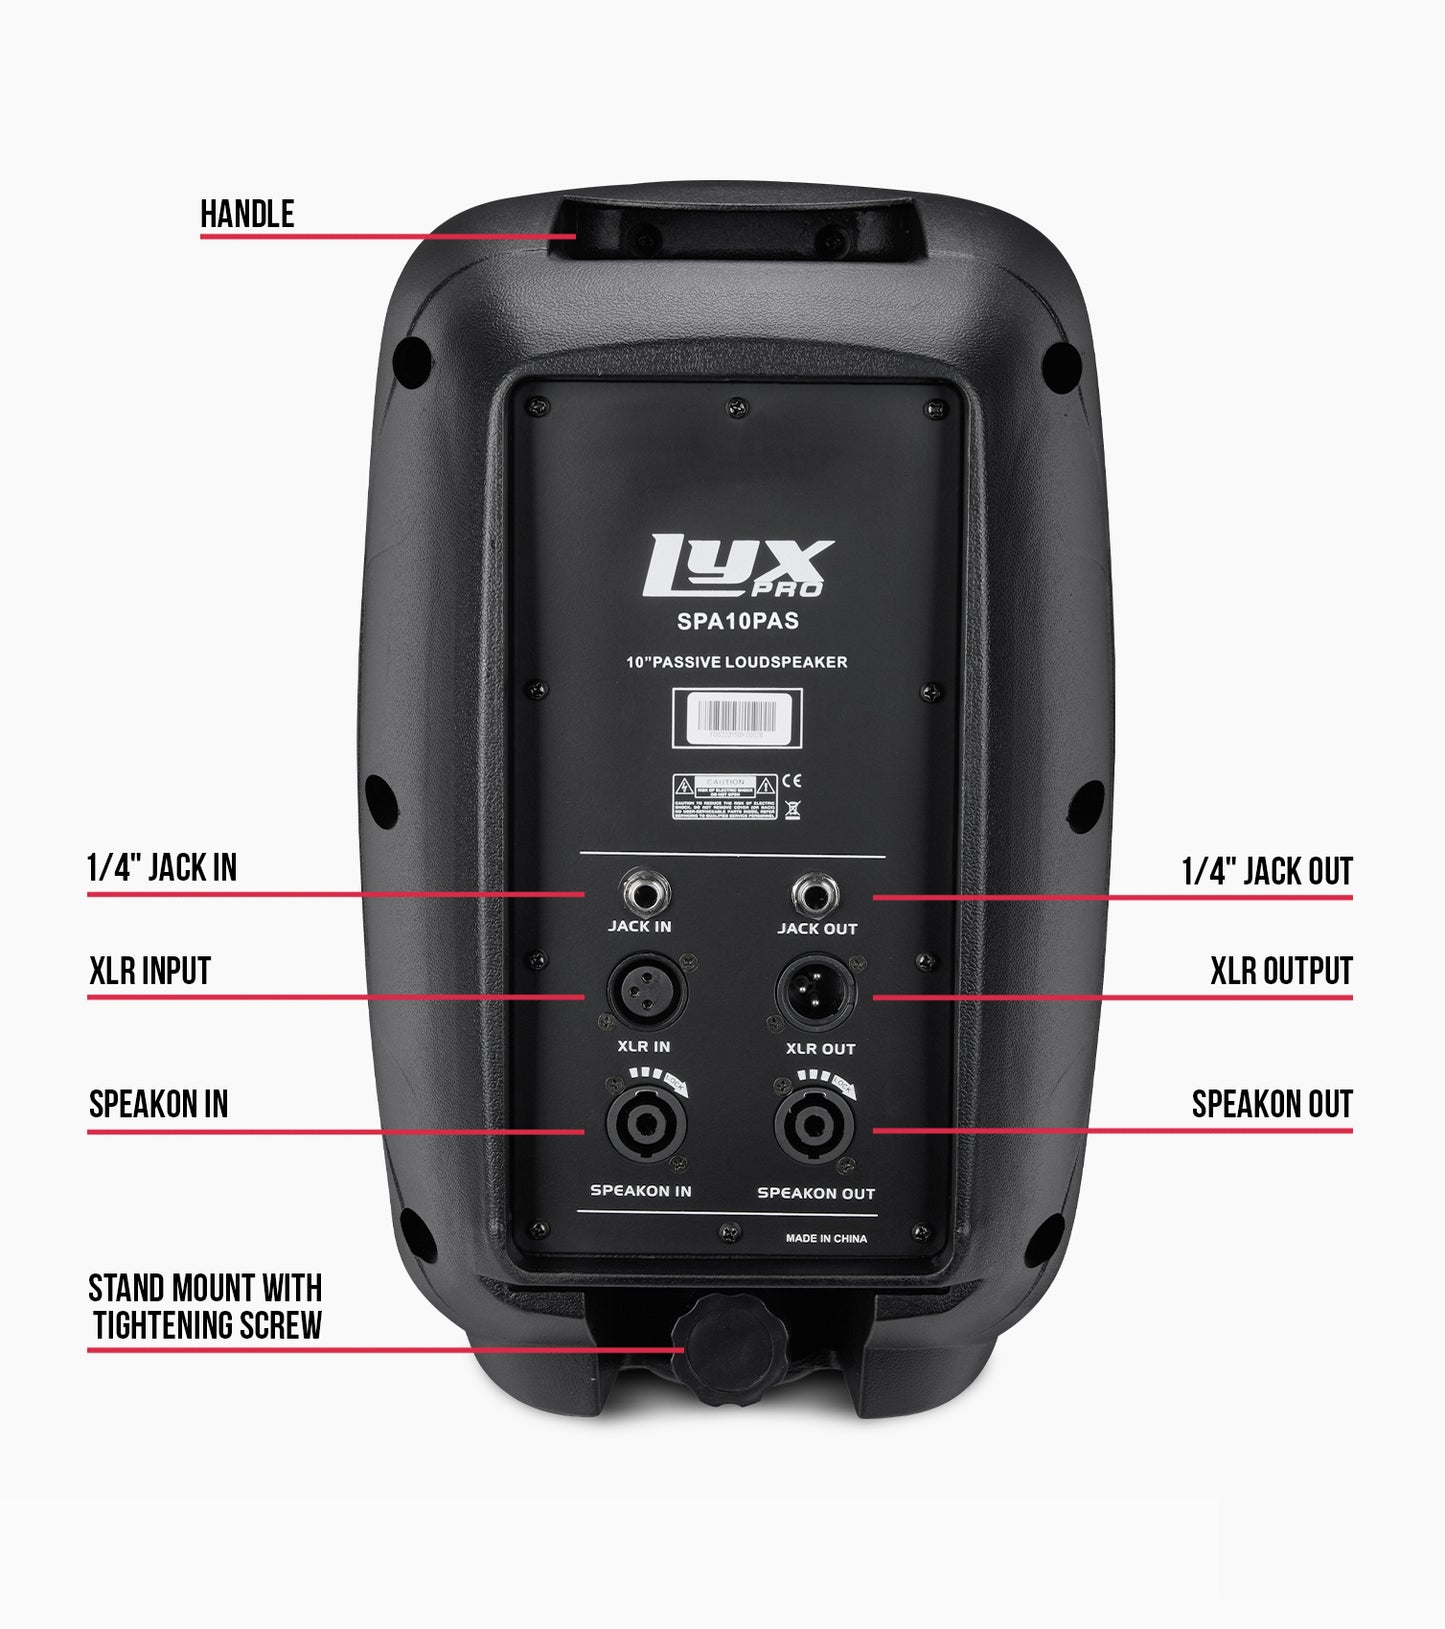 LyxPro Portable 10 in Passive PA Speaker - Inputs and outputs